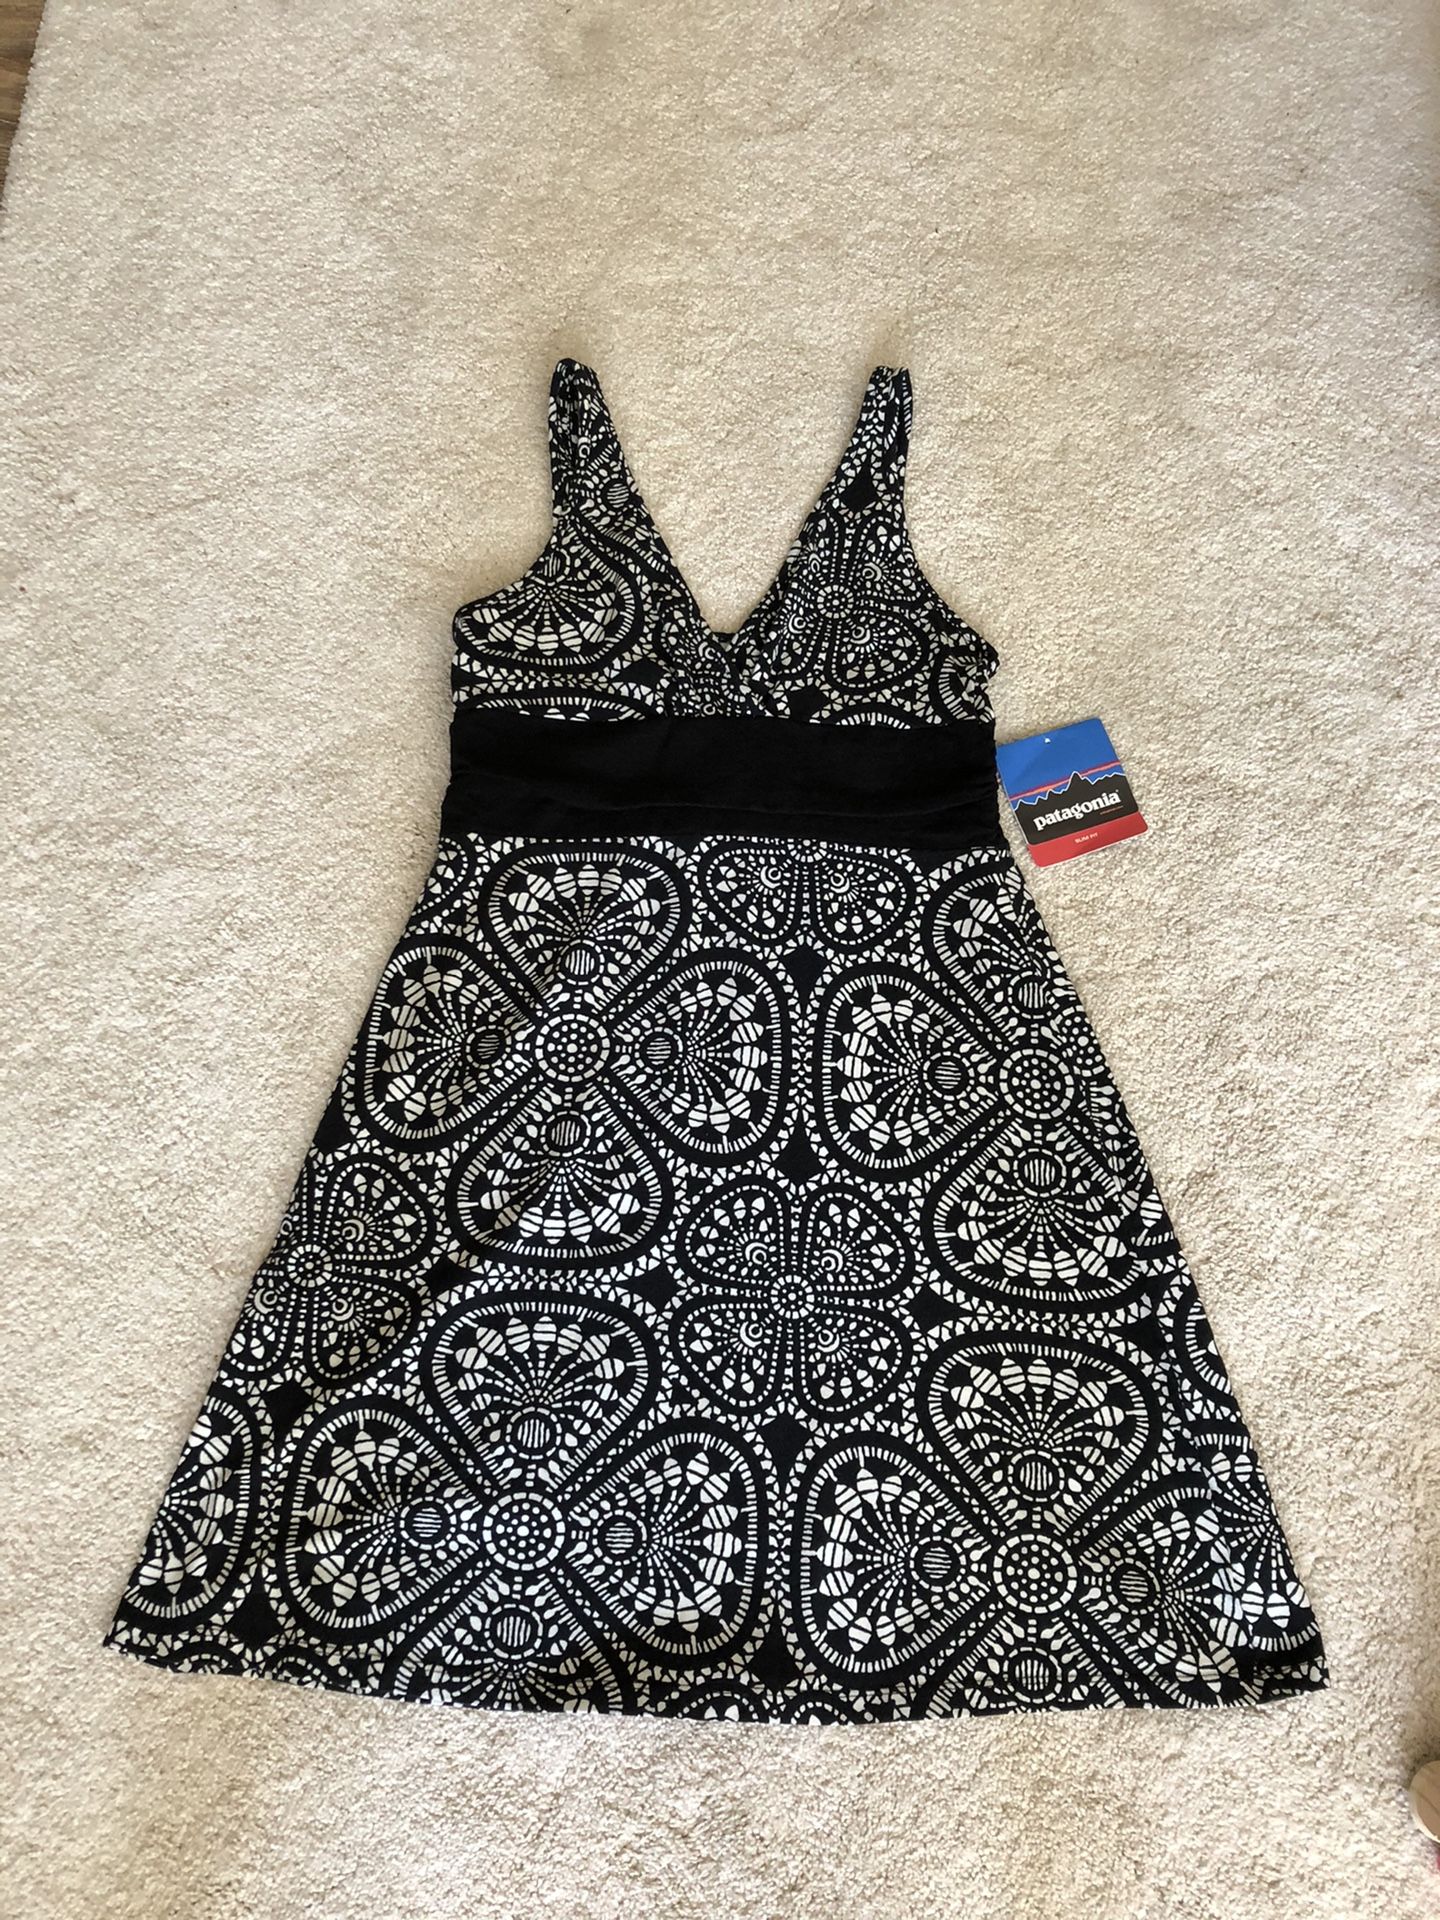 Patagonia Margot Dress brand new with tags